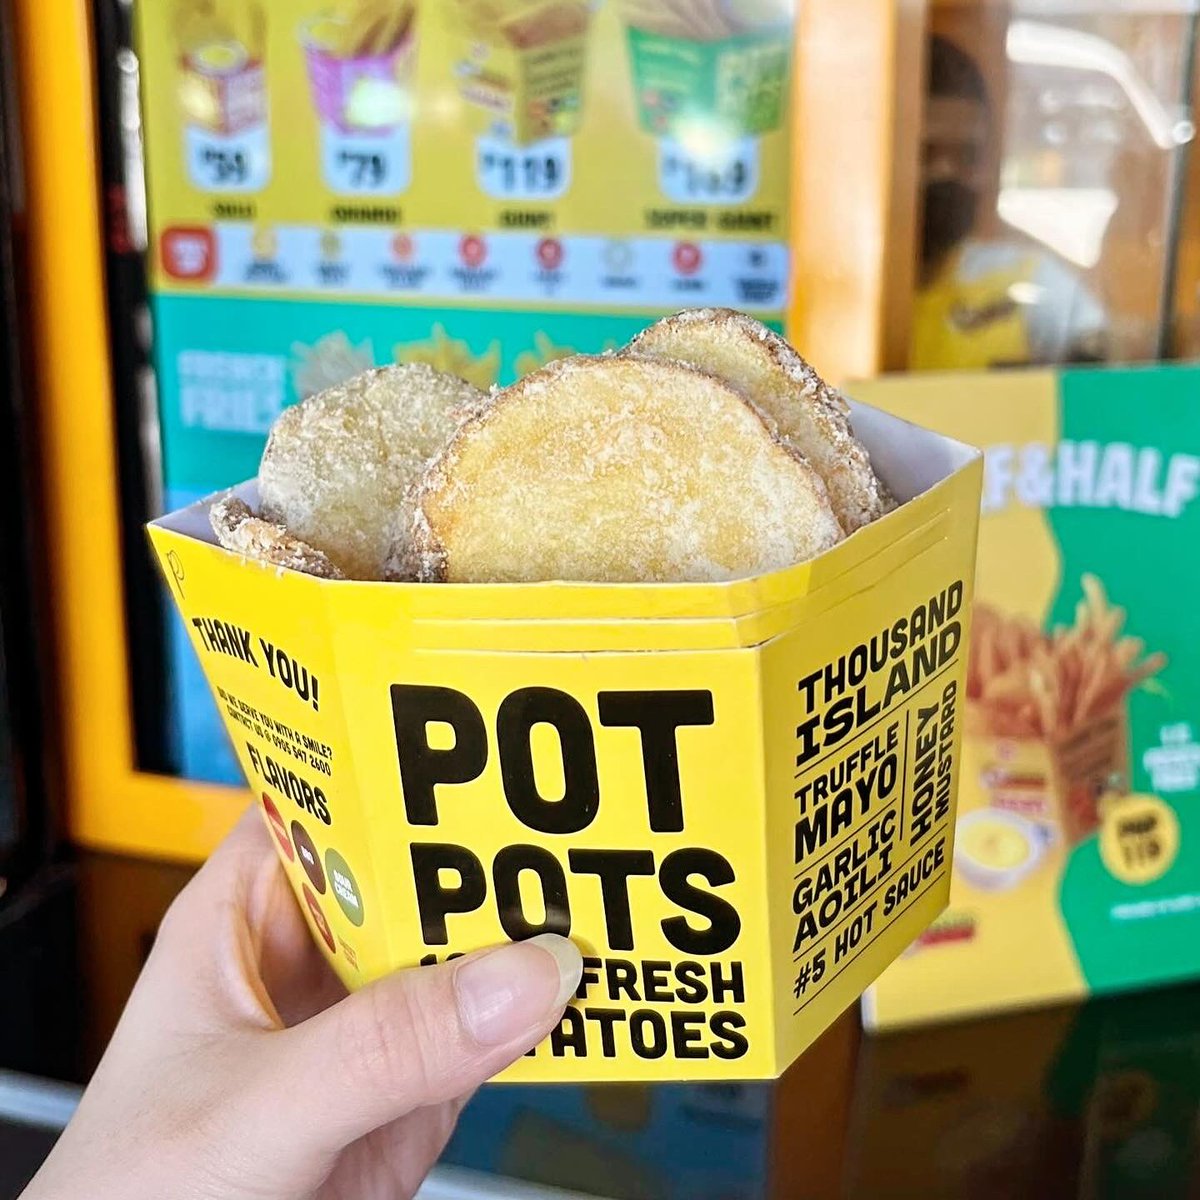 📣 New kiosk alert! 

The OG Potato Giant expands with their 2nd branch here at Market! Market! The popular Potpots is NOW OPEN located at New Terminal. Choose from your favorite flavors like cheese, sour cream and more. Check them out! 😉🥔

#FunInTheFinds #iLoveMarketMarket